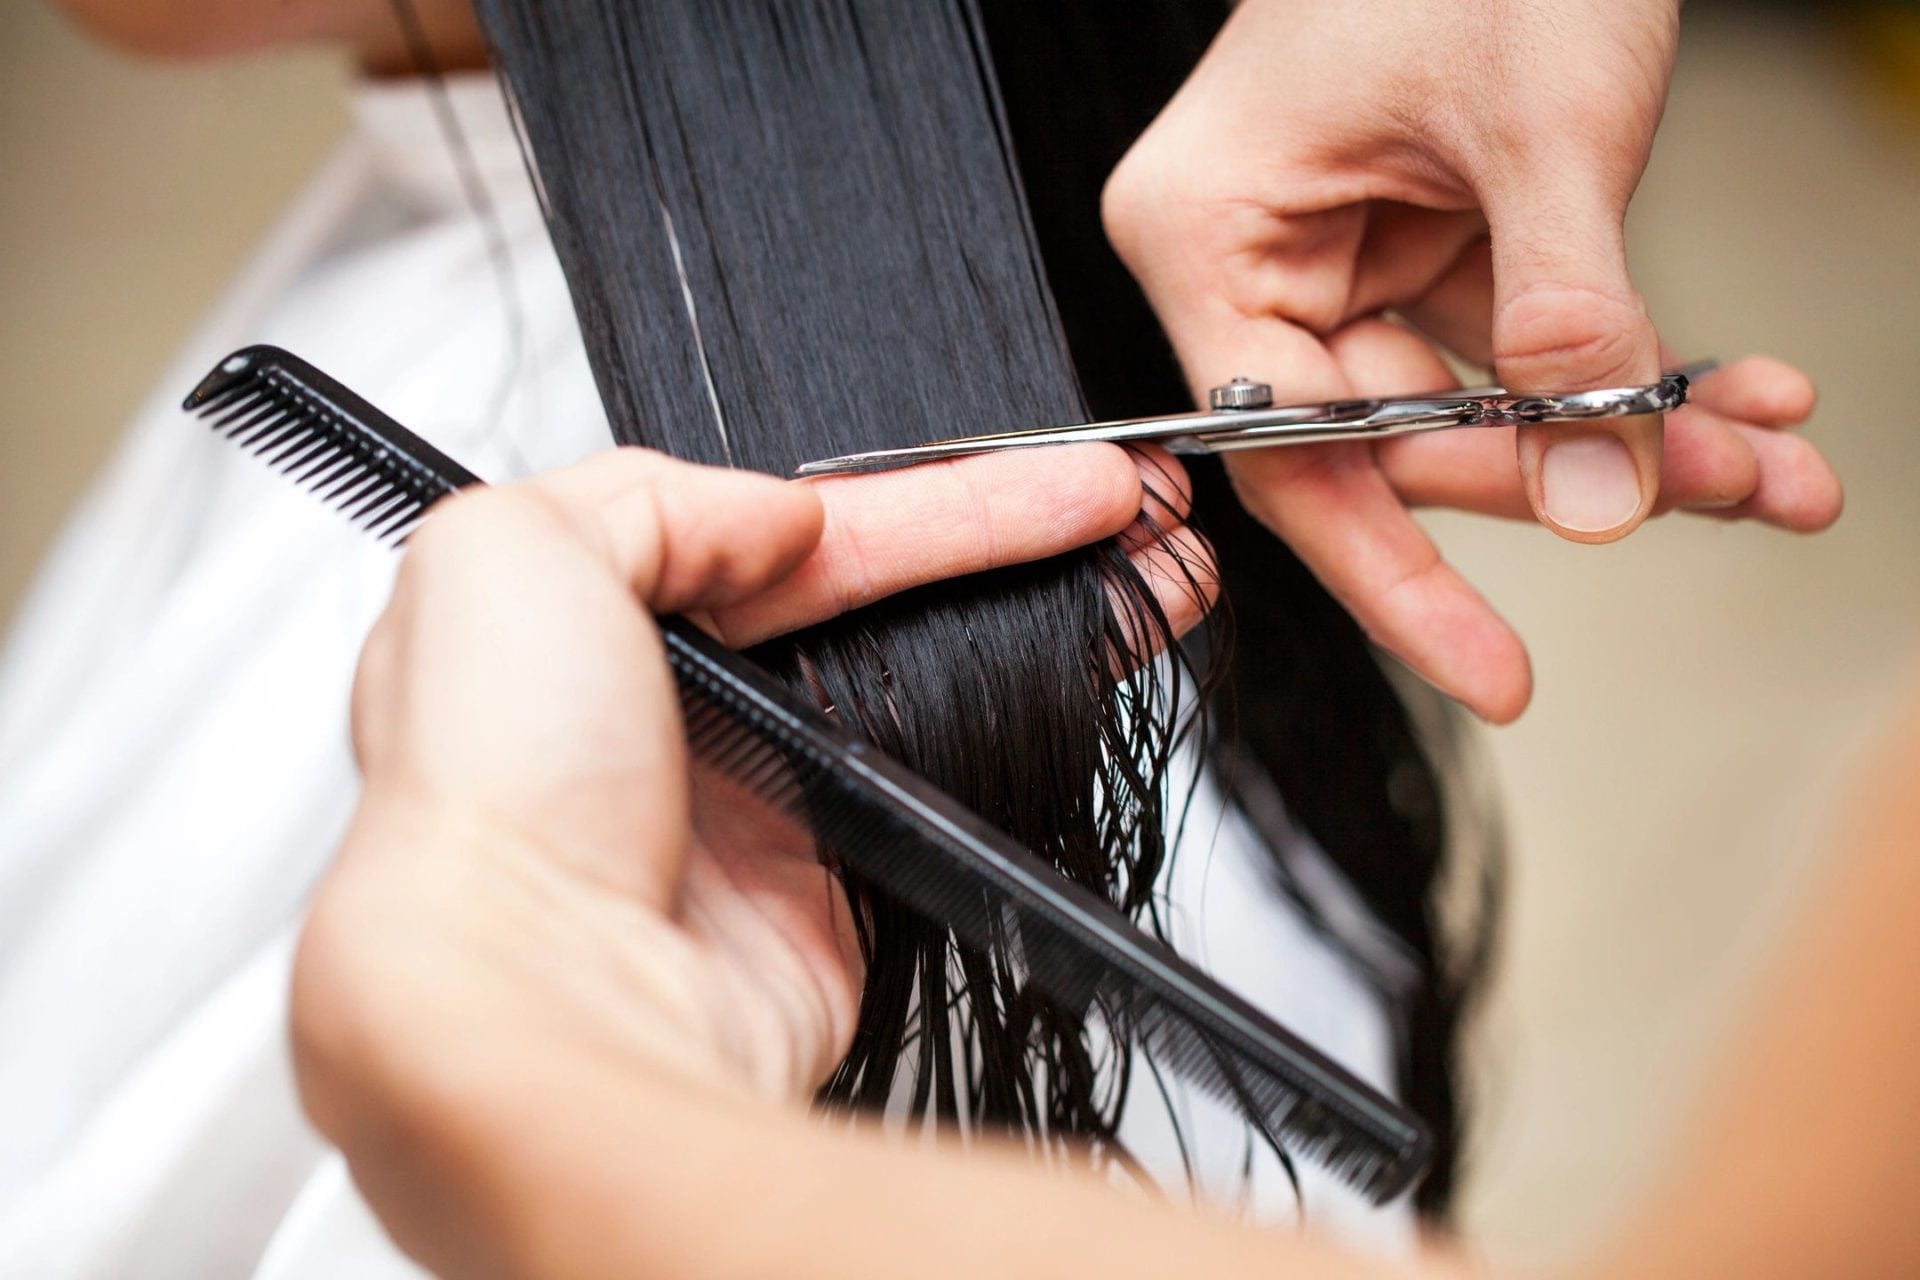 A person cutting their hair with scissors and comb.